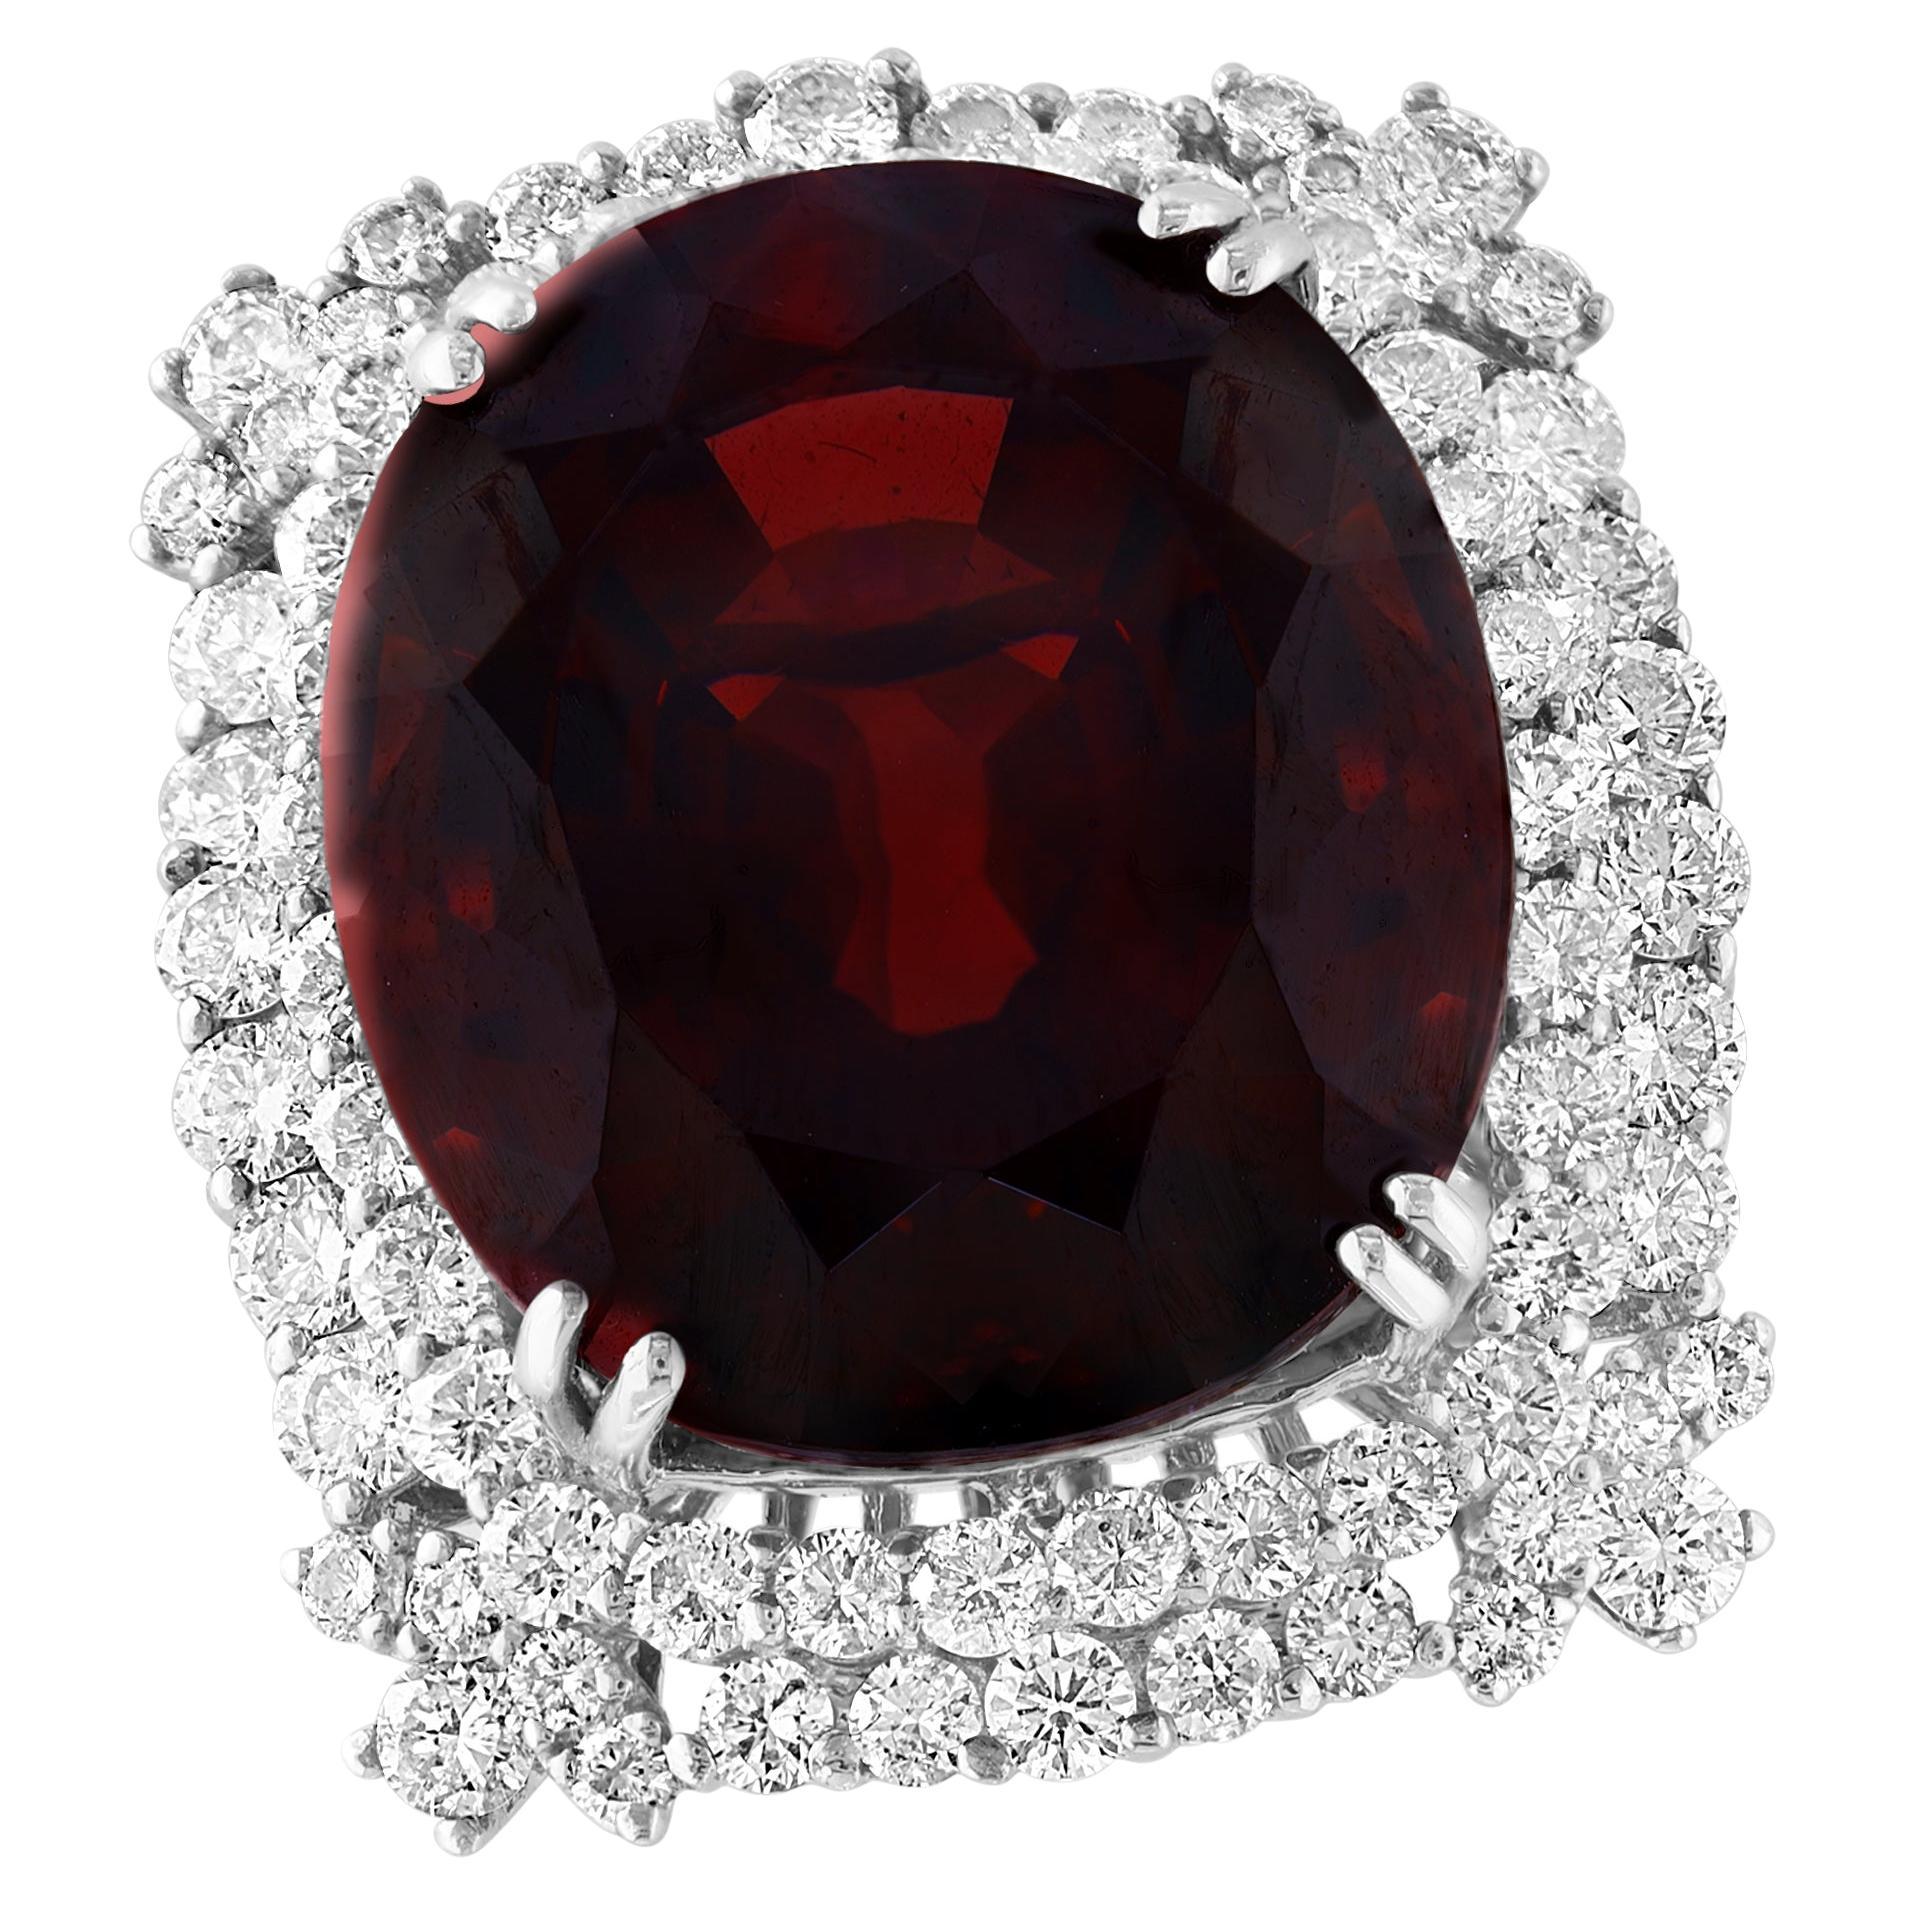 Approximately 25 Carat Cushion Shape Rhodolite Garnet & 5.8 Ct Diamond Ring 18 Kt White Gold, Estate
This spectacular Ring consisting of a single Cushion l Shape  Extremely High quality Rhodolite Garnet approximately 25 Carat.  The  Garnet ring has